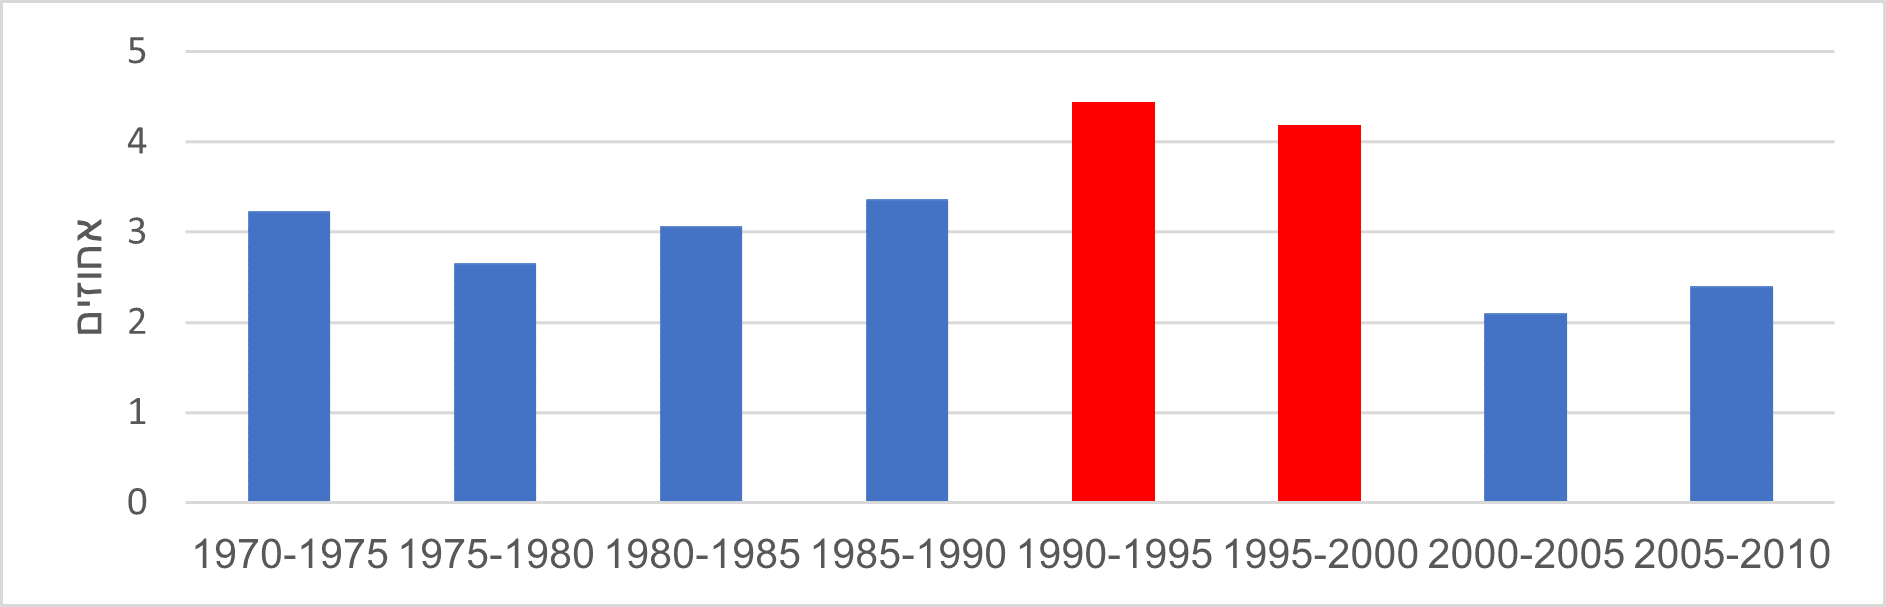 Graph 2: Average annual rate of change in the population of Gaza, Judea, and Samaria, by half-decades. A significant increase can be seen in the periods 1990–1995 and 1995–2000. Source: The UN, World Population Prospects: The 2012 Revision Ibid, p. 142/166. The graph depicts the data as they appear in the table. 